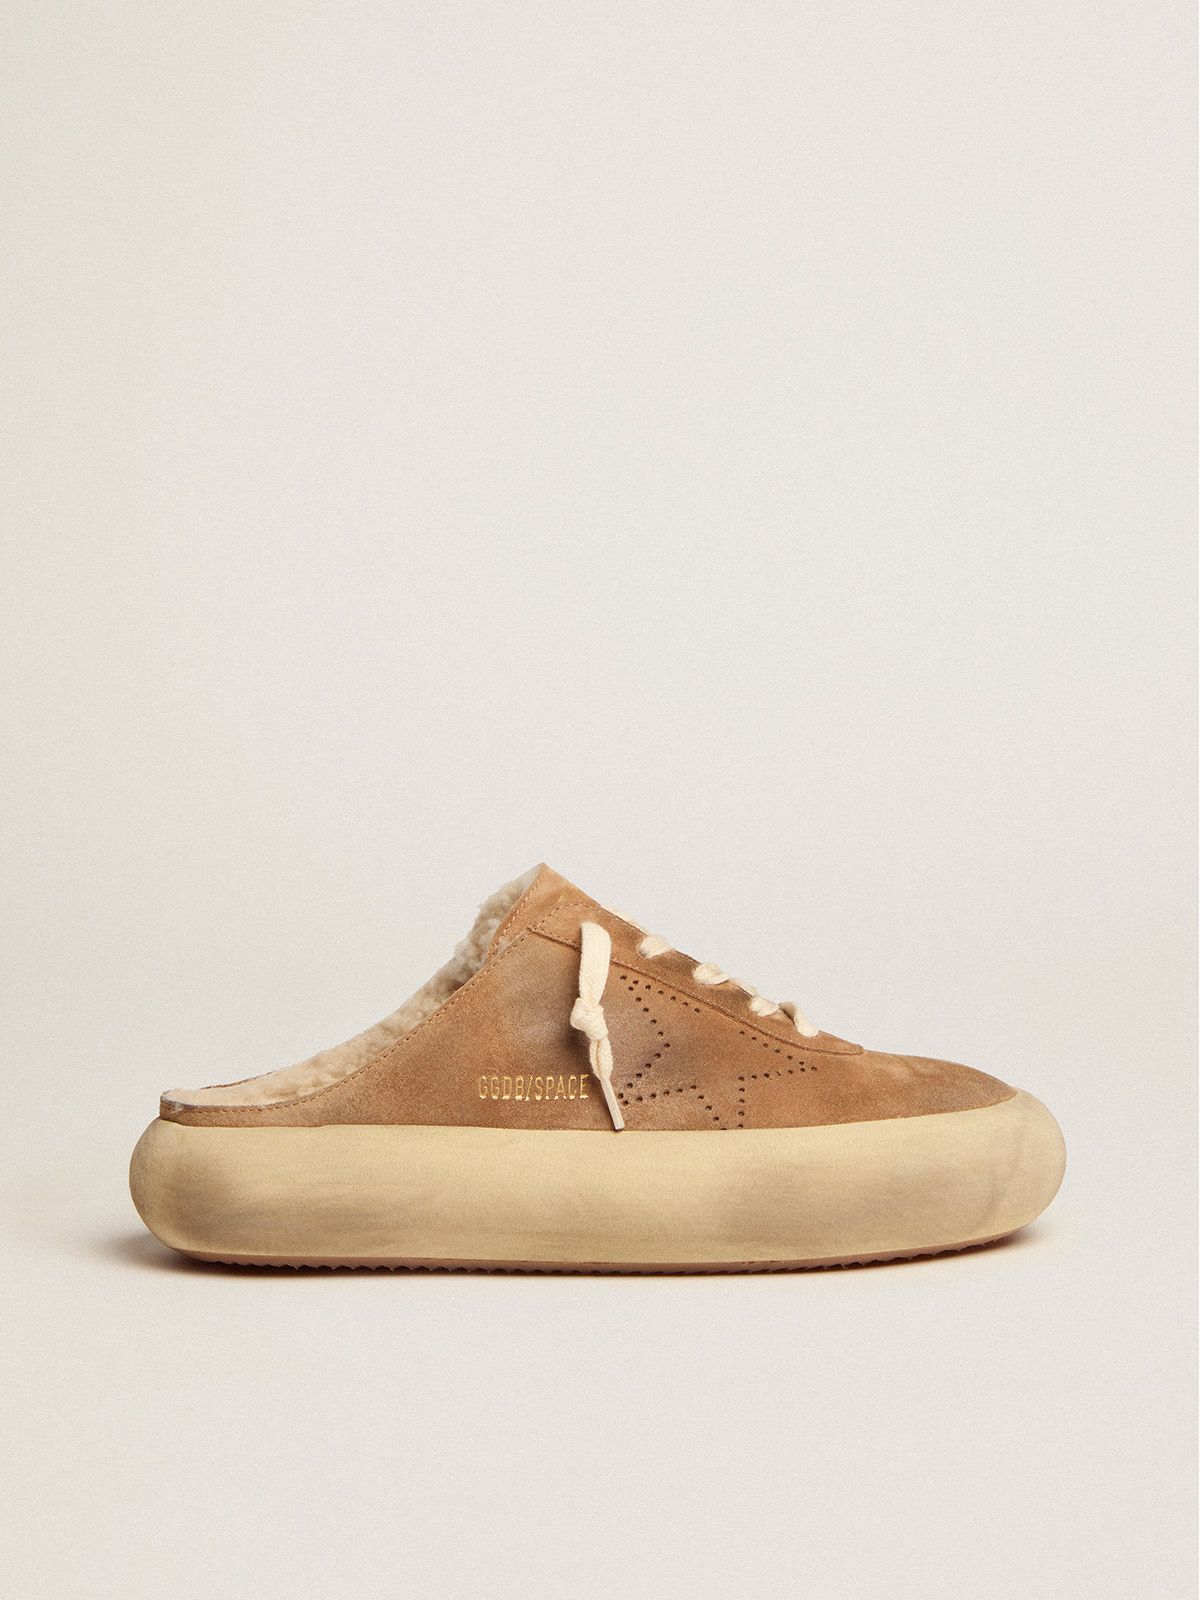 golden goose tobacco-colored lining shearling in Sabot Space-Star with shoes suede